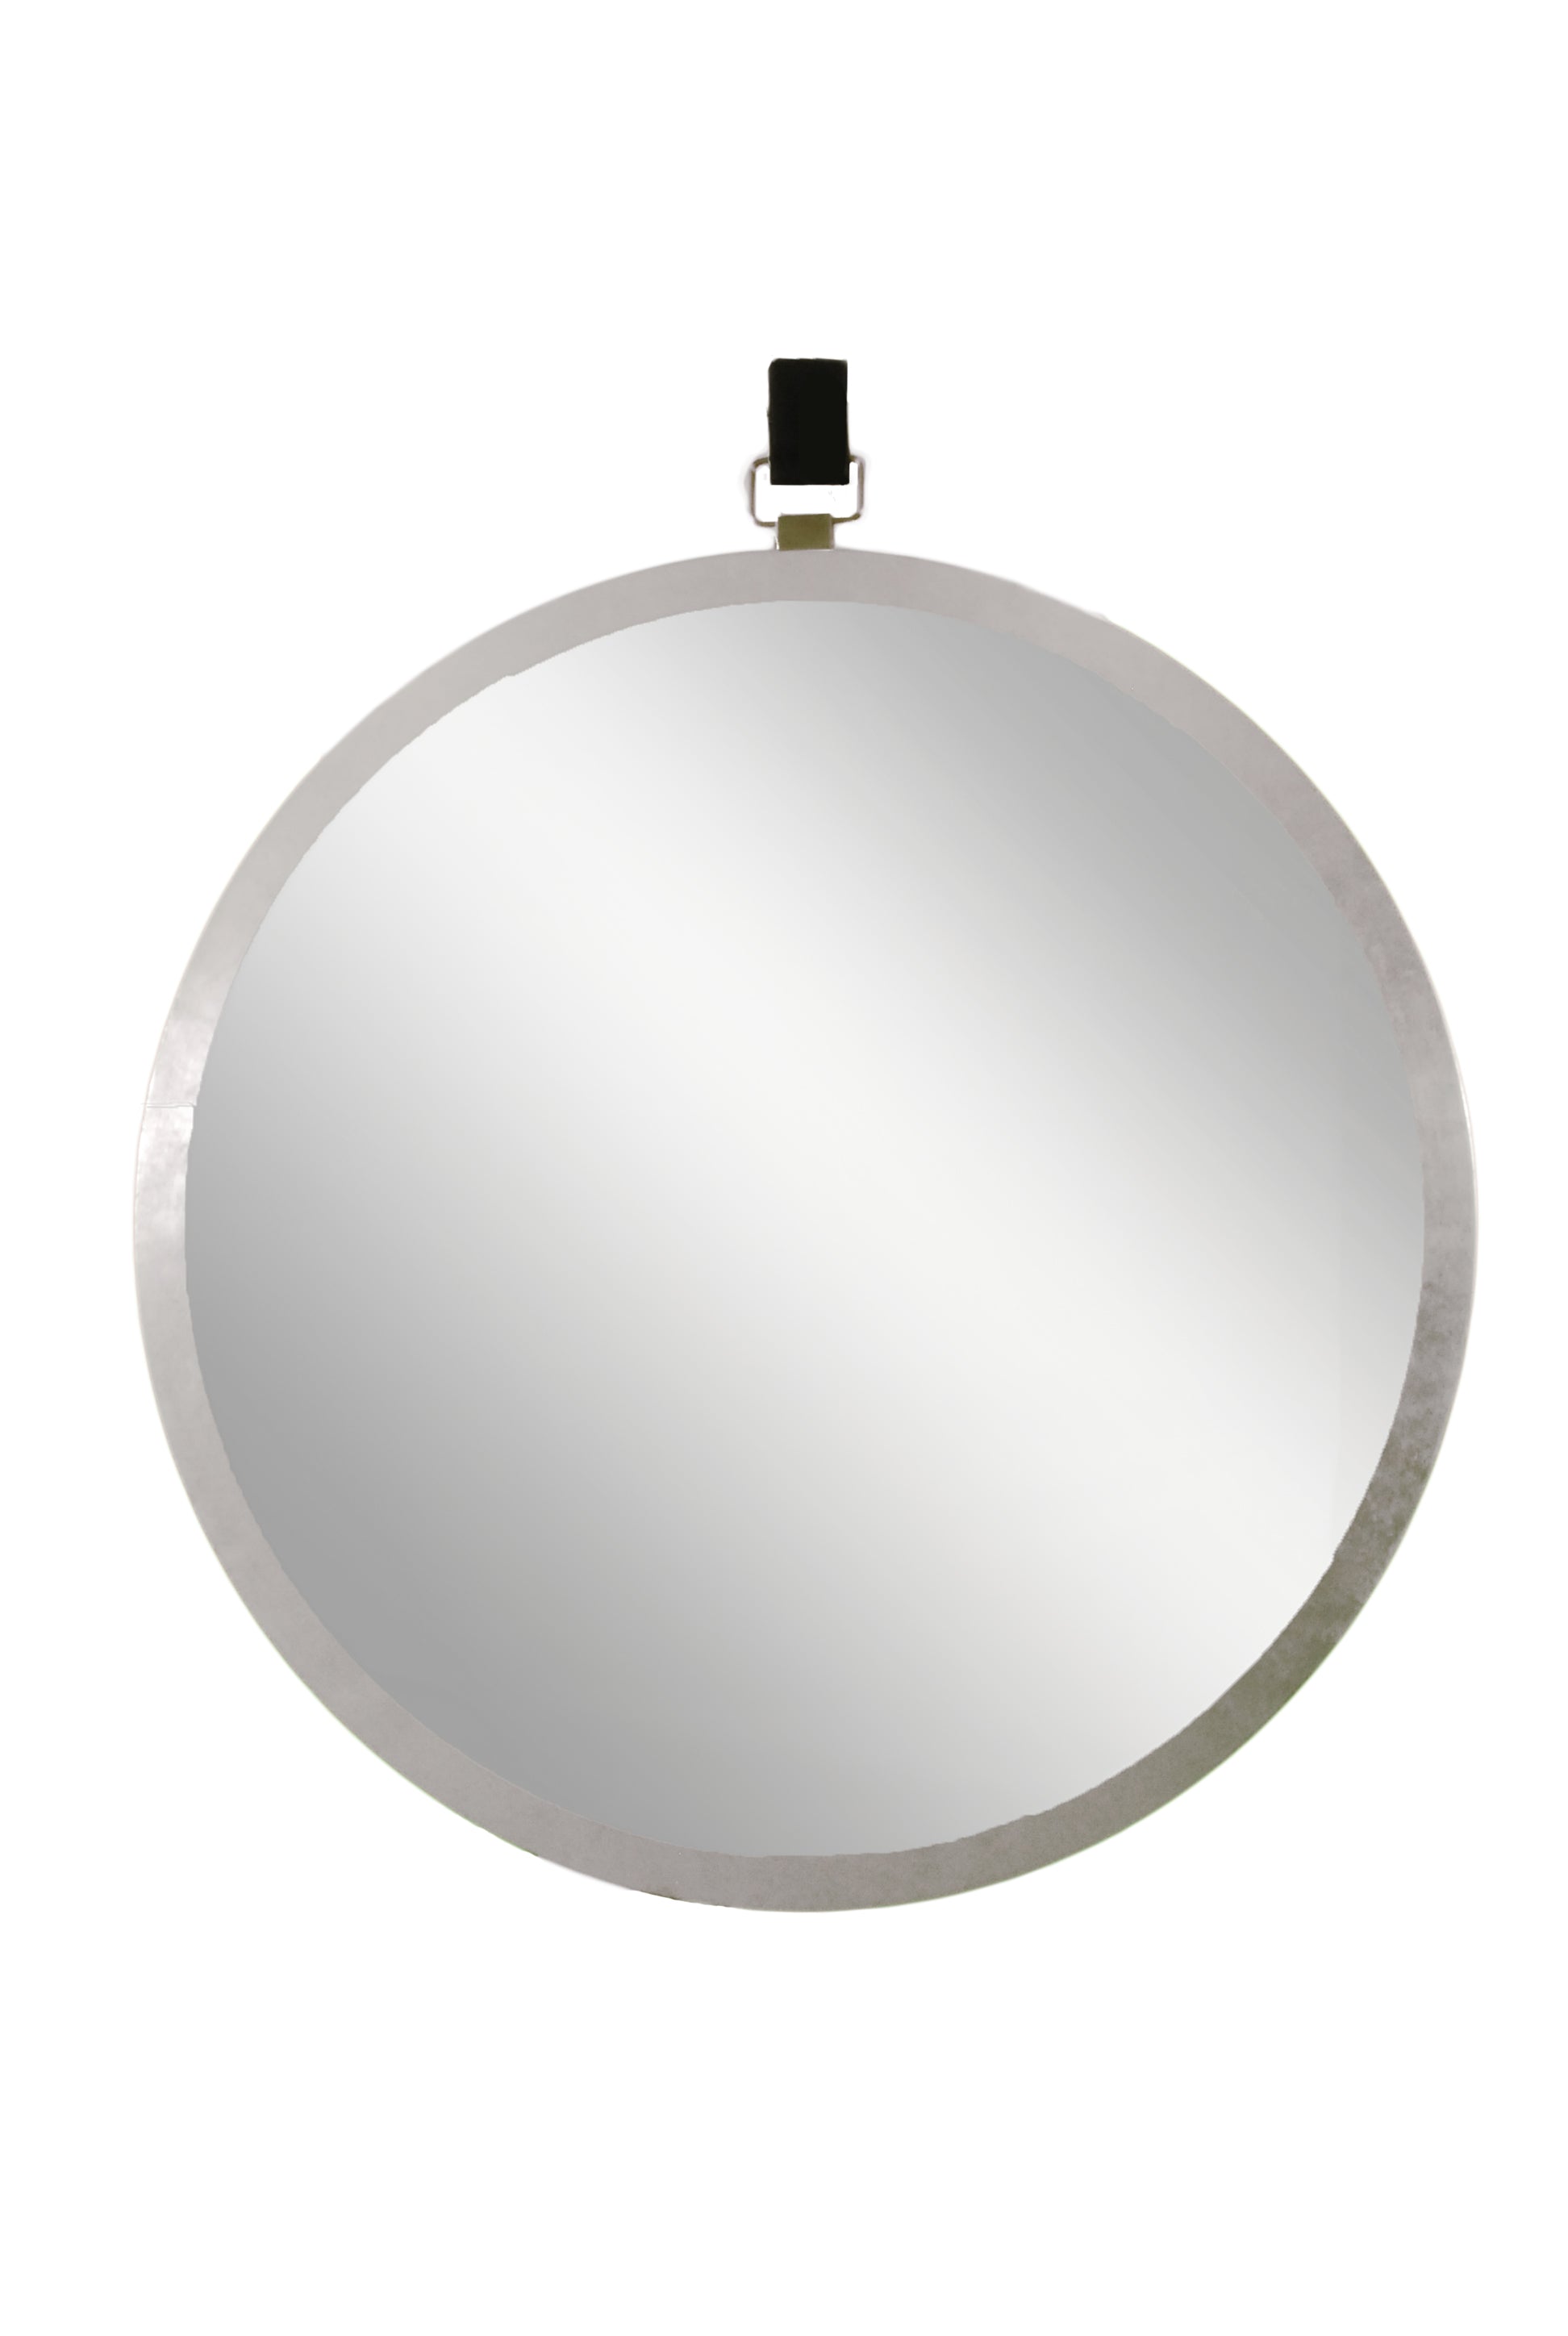 Round mirror with metal frame and decorative leather strap